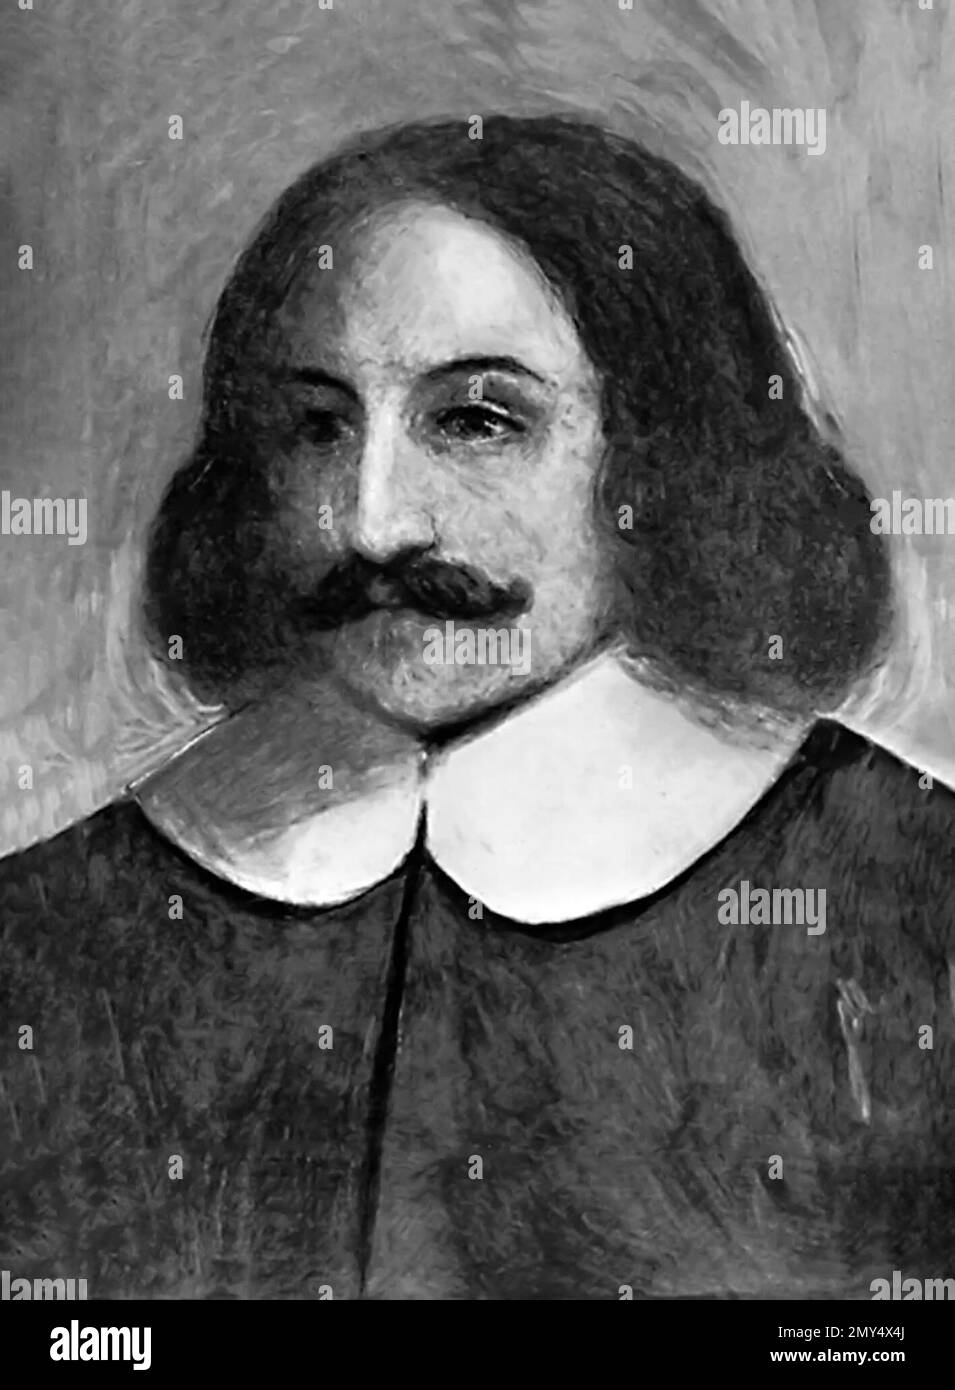 William Bradford. Illustration of the Puritan settler who became governor of the Plymouth colony, William Bradford (1590-1657) Stock Photo